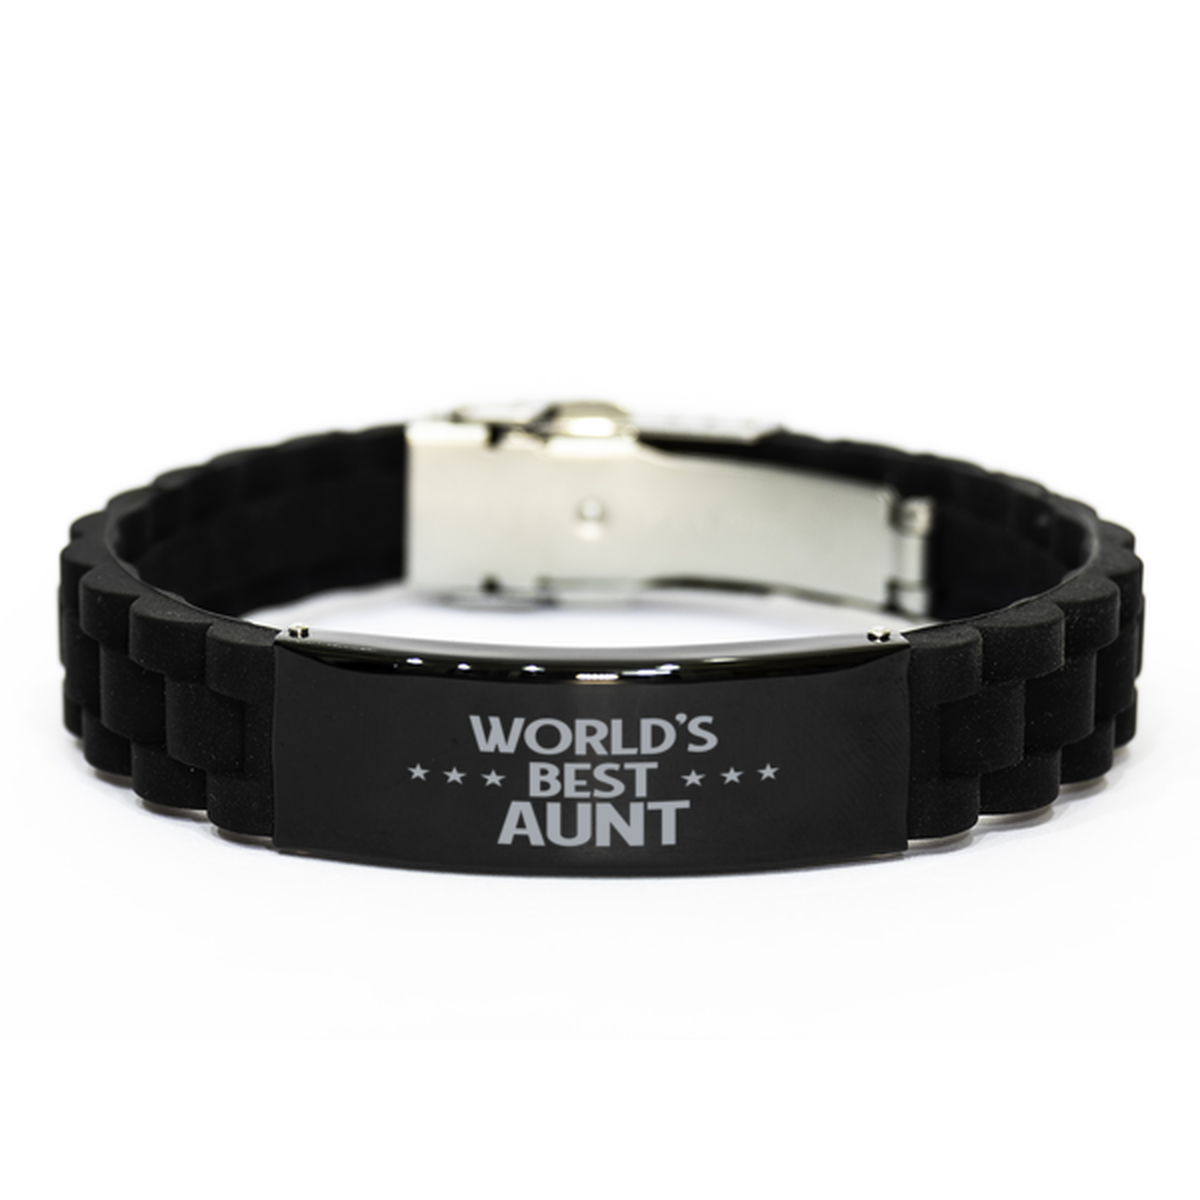 World's Best Aunt Gifts, Funny Black Engraved Bracelet For Aunt, Family Gifts For Women